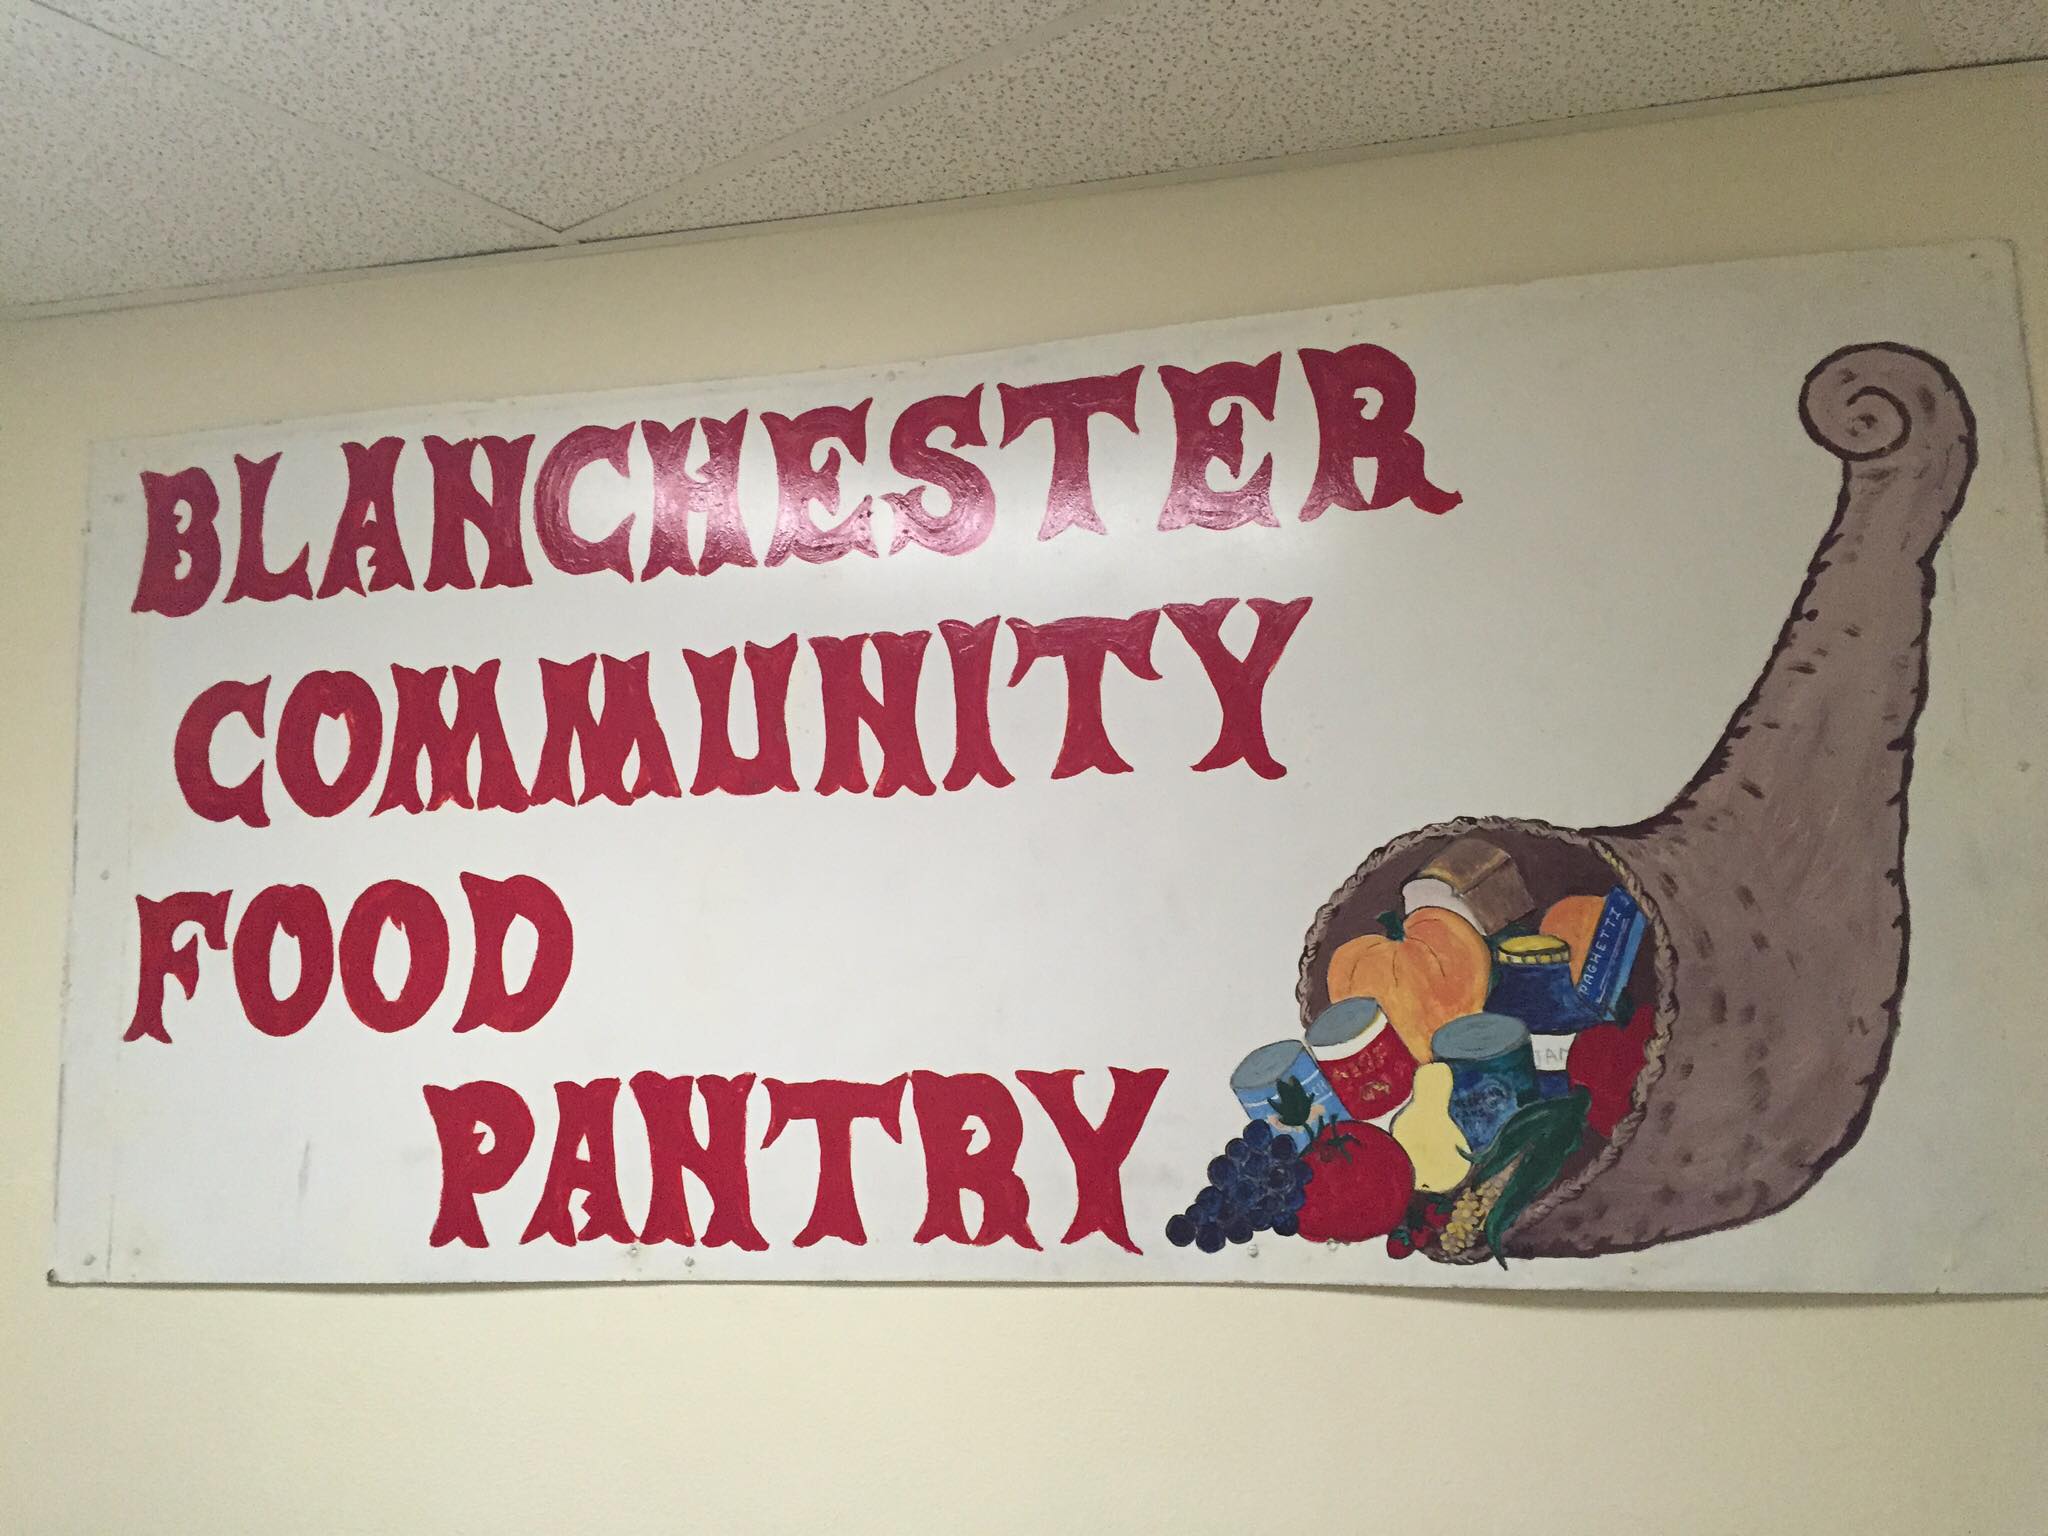 Blanchester Community Food Pantry